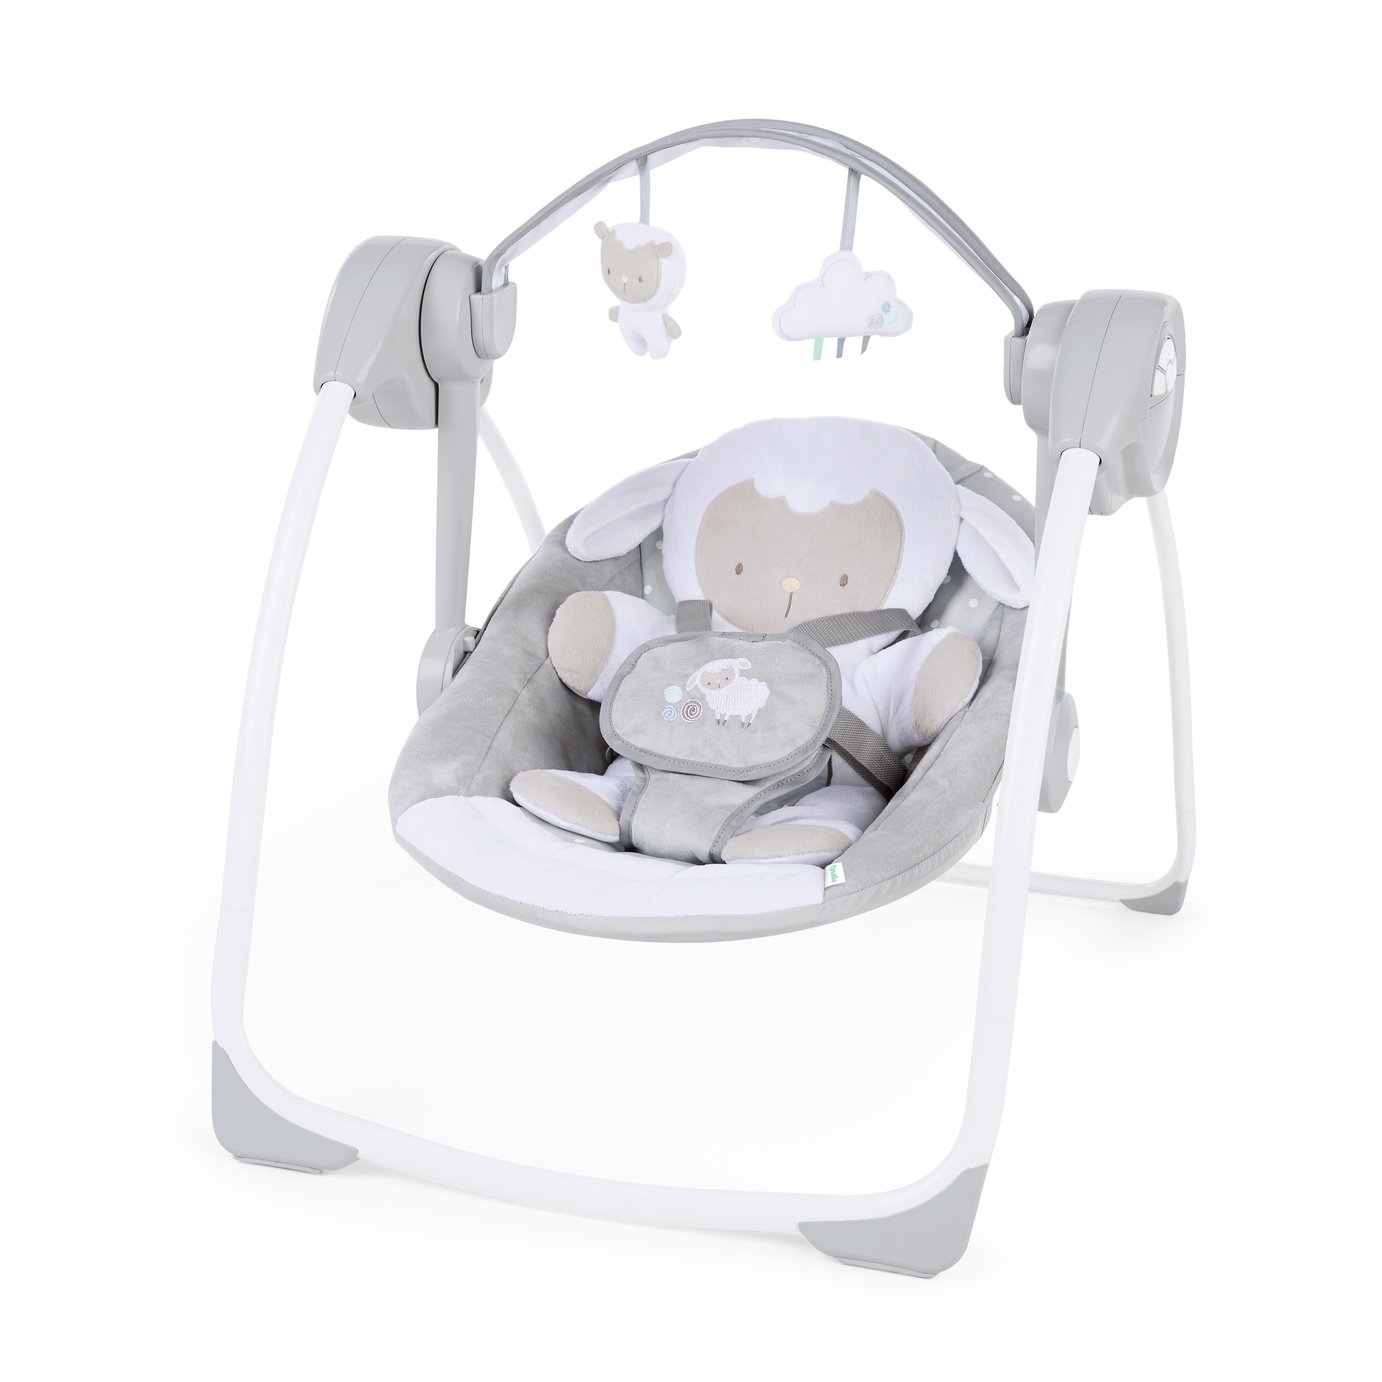 Ingenuity Comfort 2 Go Portable Swing Review